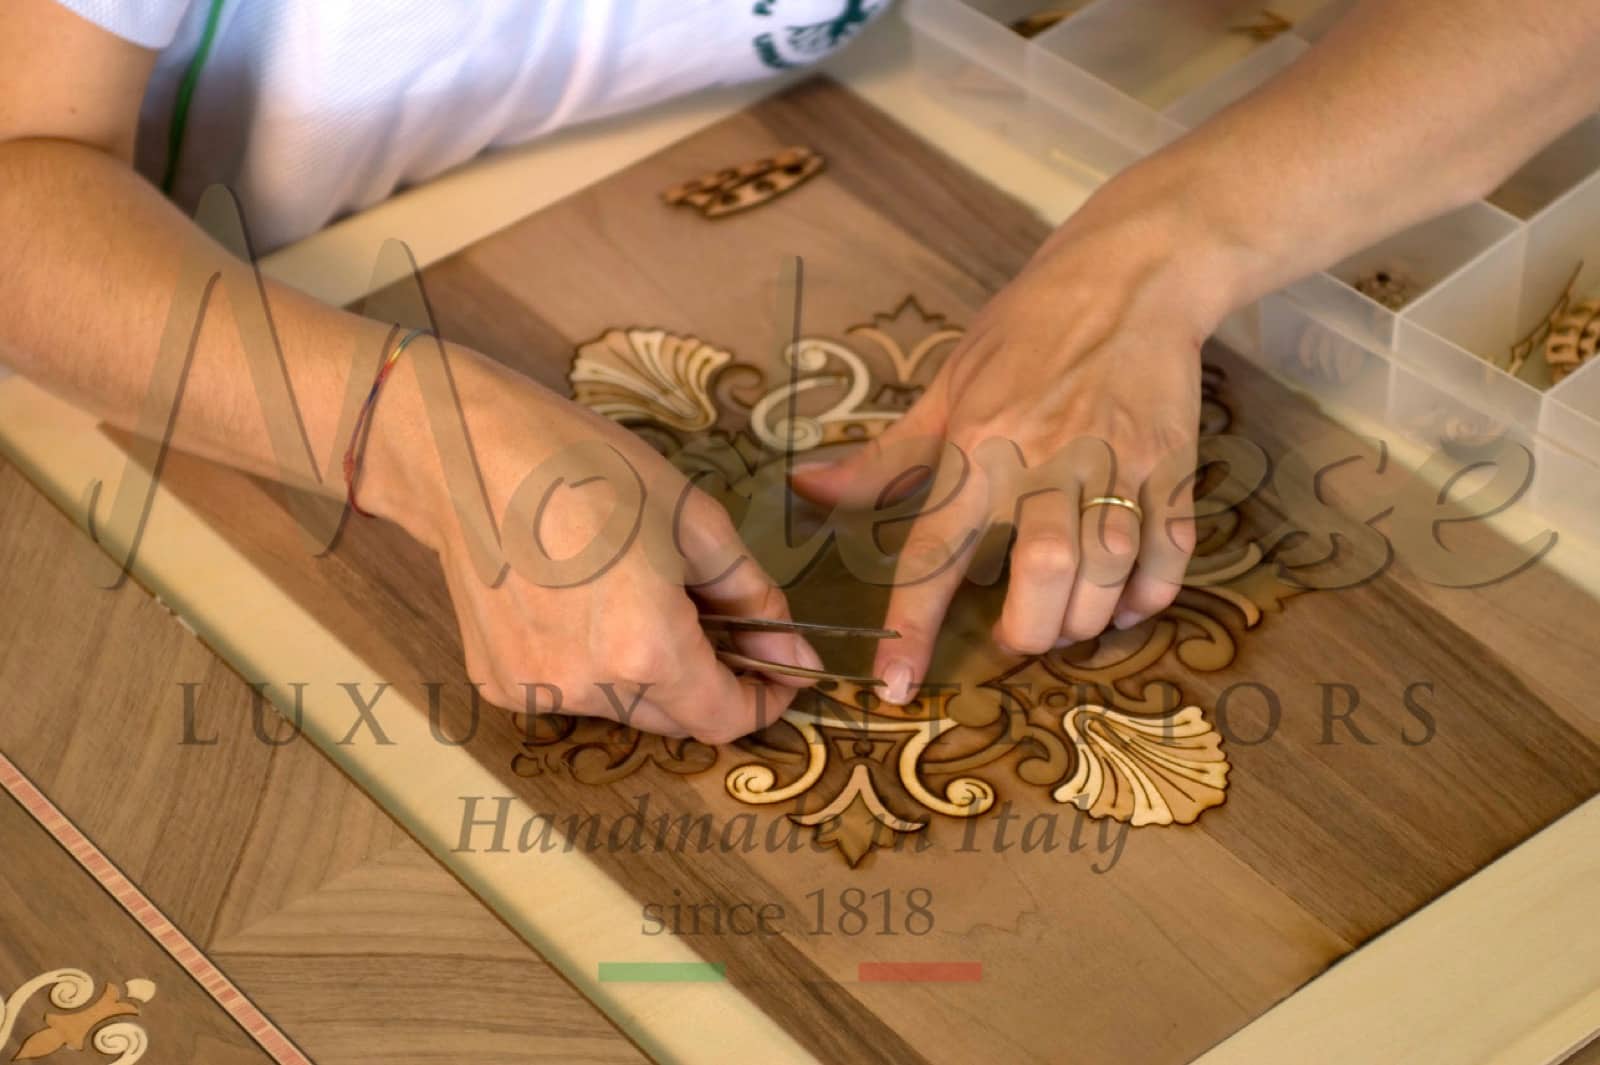 refined inlays traditional Italian Venetian style handmade production furnishing craftsmanship artisans premium quality solid wood handmade customized pieces mother marquetry pearl classic wooden inlay